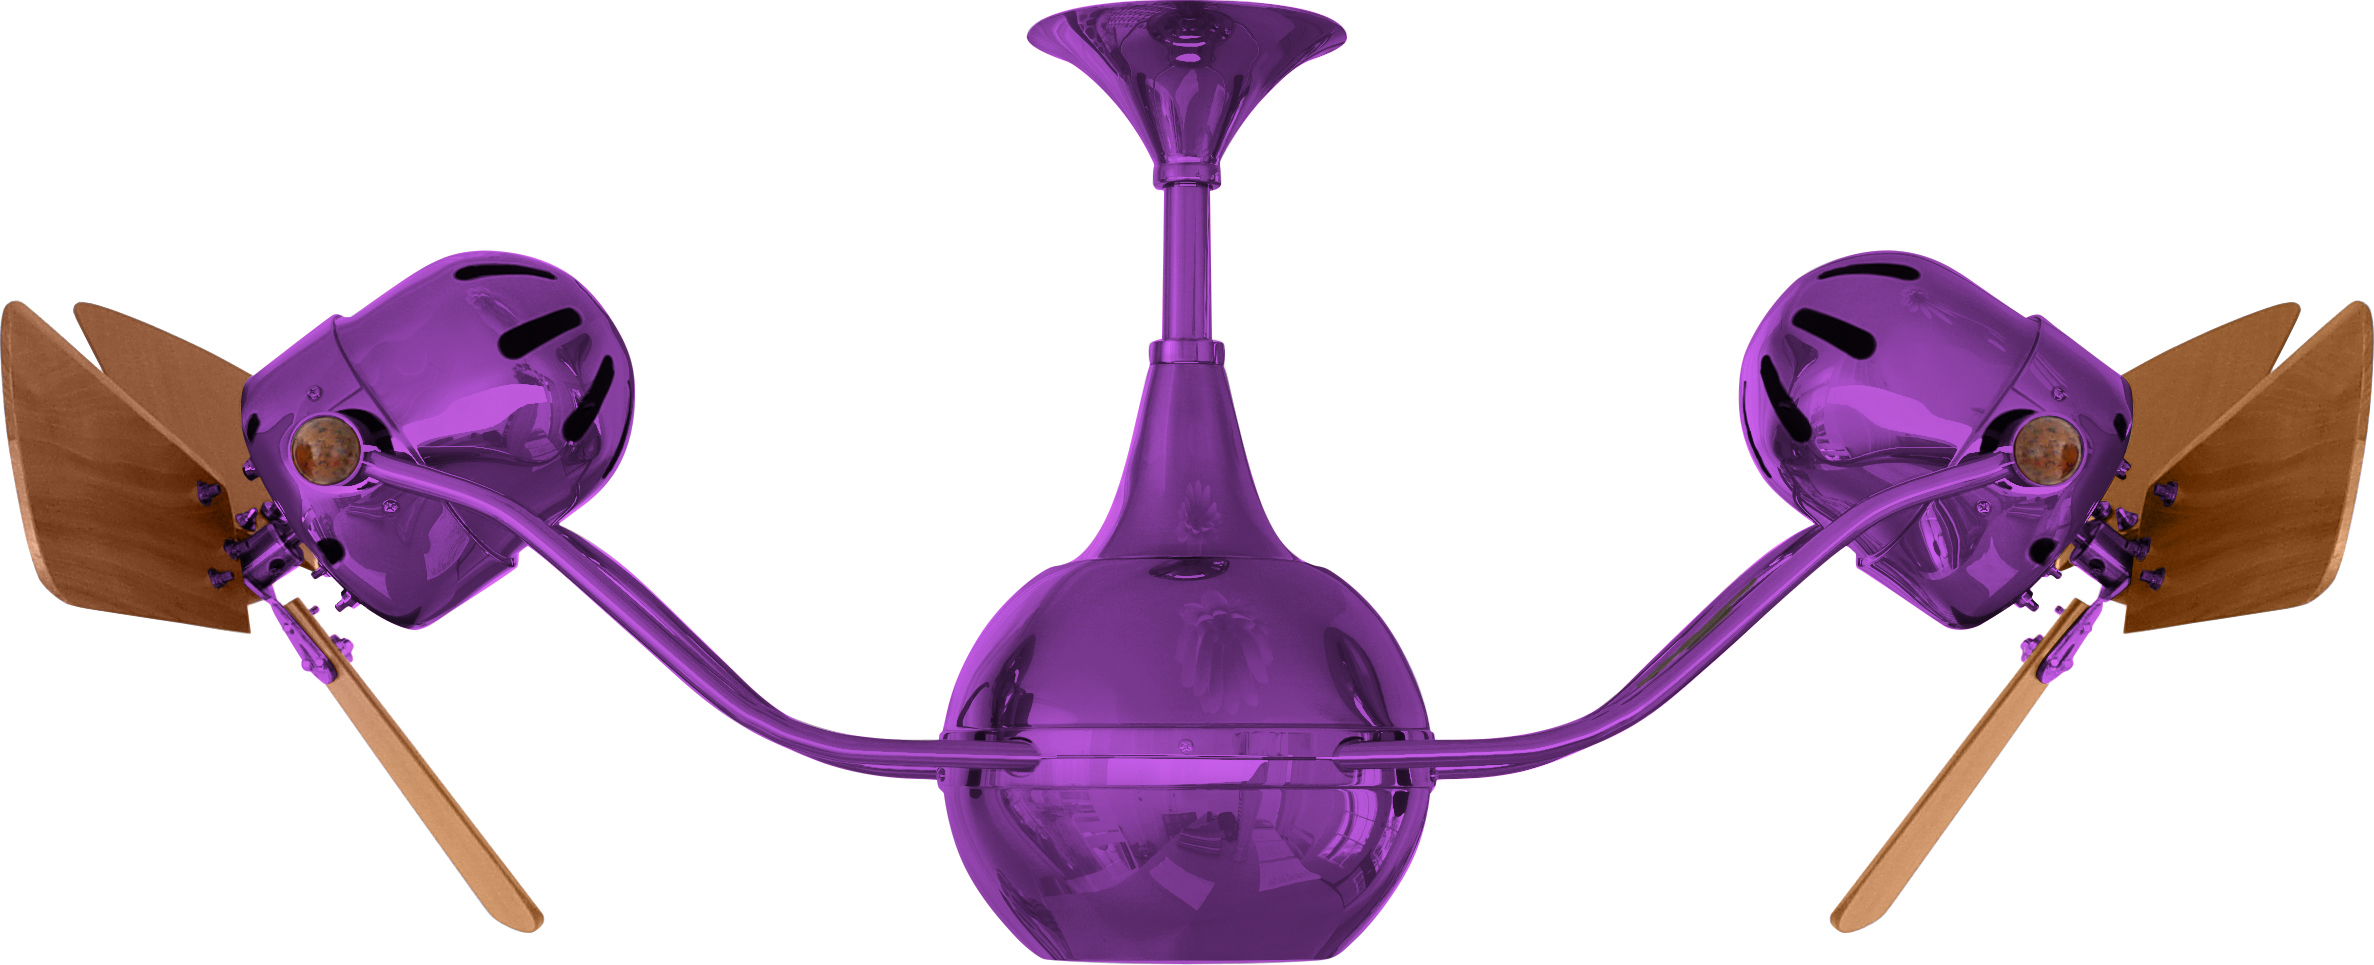 Vent-Bettina rotational dual head ceiling fan in Light Purple / Ametista finish with solid Mahogany wood blades made by Matthews Fan Company.